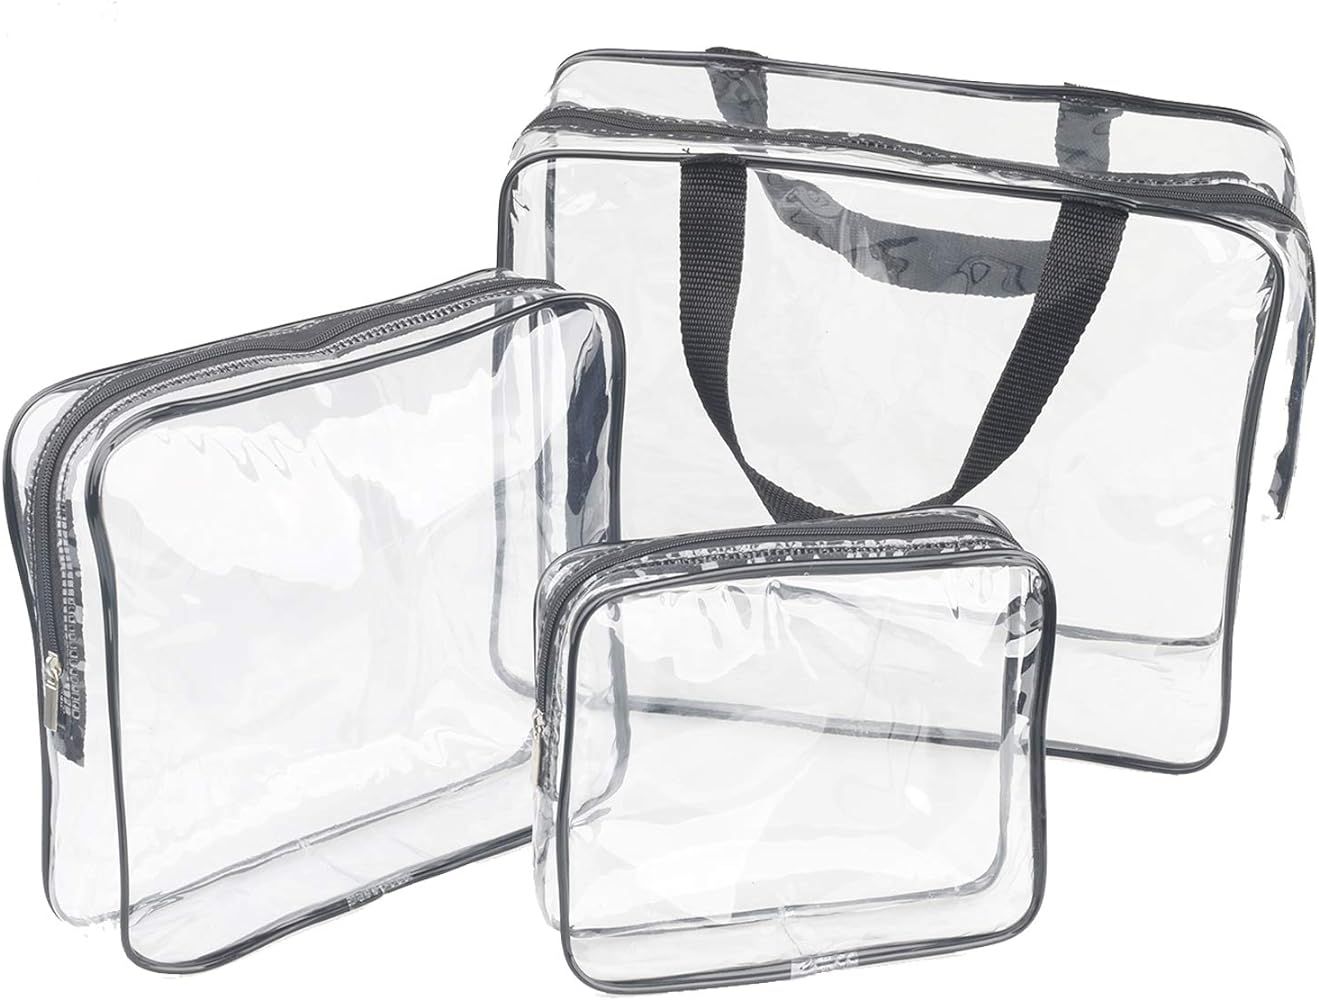 3 Pieces Large Clear Travel Bags for Toiletries, Waterproof Clear Plastic Cosmetic Makeup Bags, Tran | Amazon (US)